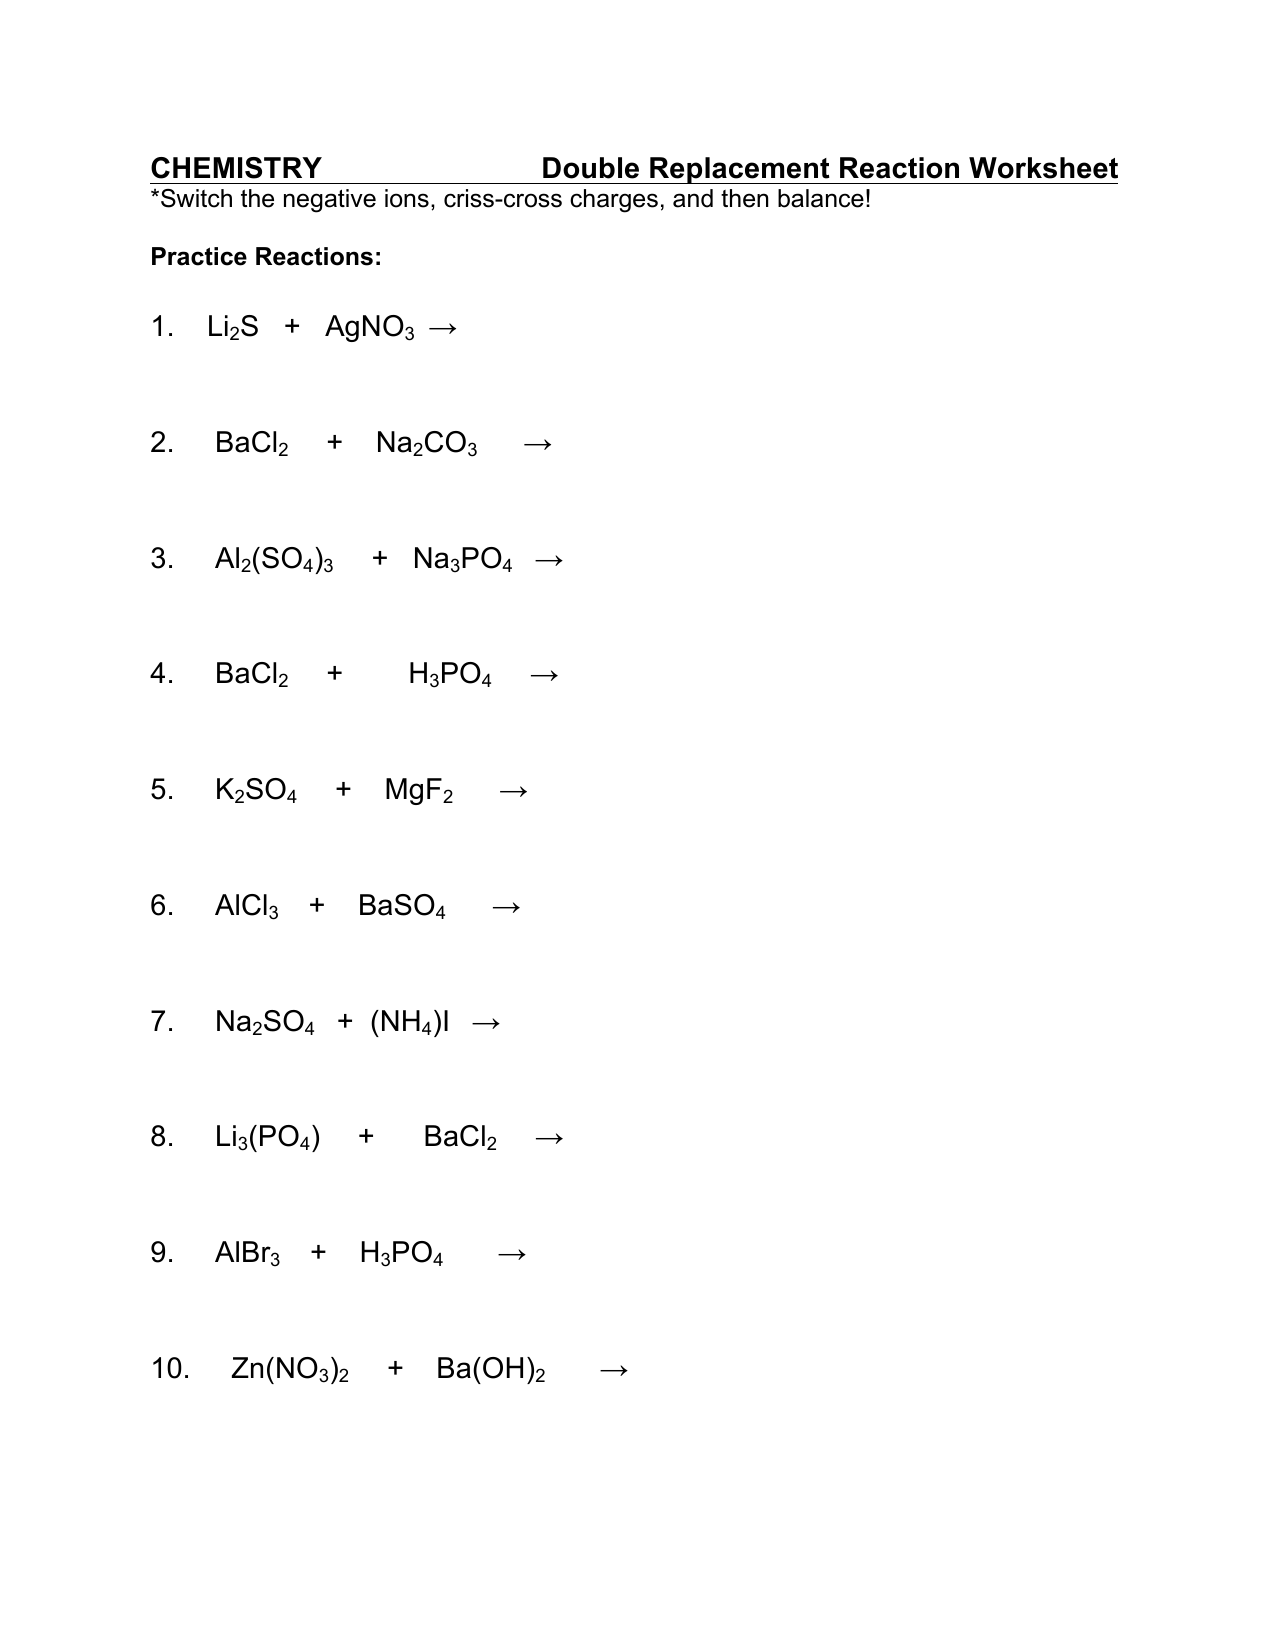 Double Replacement Rxn Worksheet Inside Double Replacement Reaction Worksheet